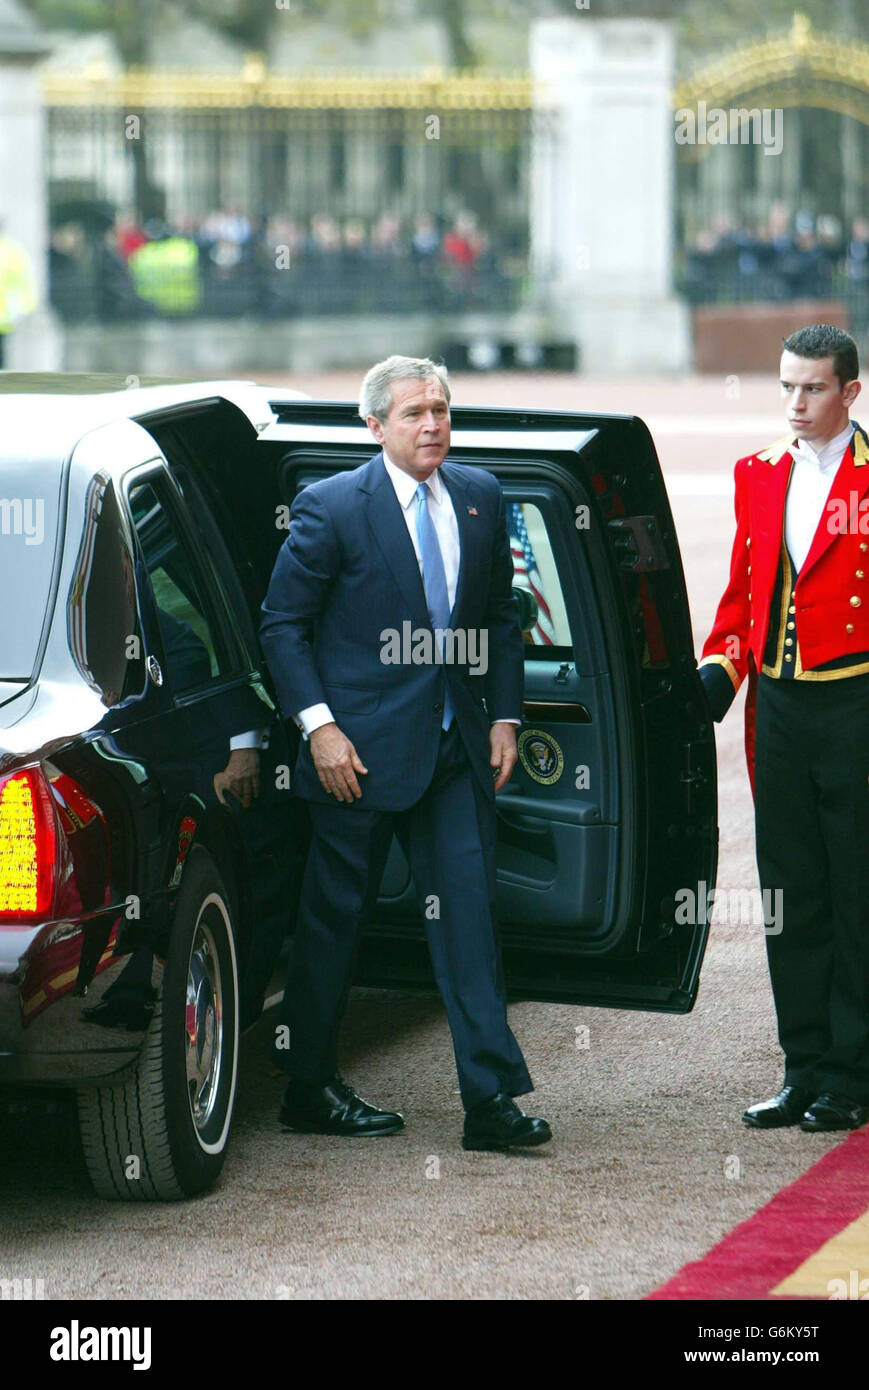 US President George W. Bush arrives at Buckingham Palace for the official American State ceremony taking place. Traditional British pomp and ceremony, including a 41-gun salute, was laid on for start of the historic state visit. The President and Mrs Bush stayed overnight at the Palace before the official welcome ceremony. Stock Photo